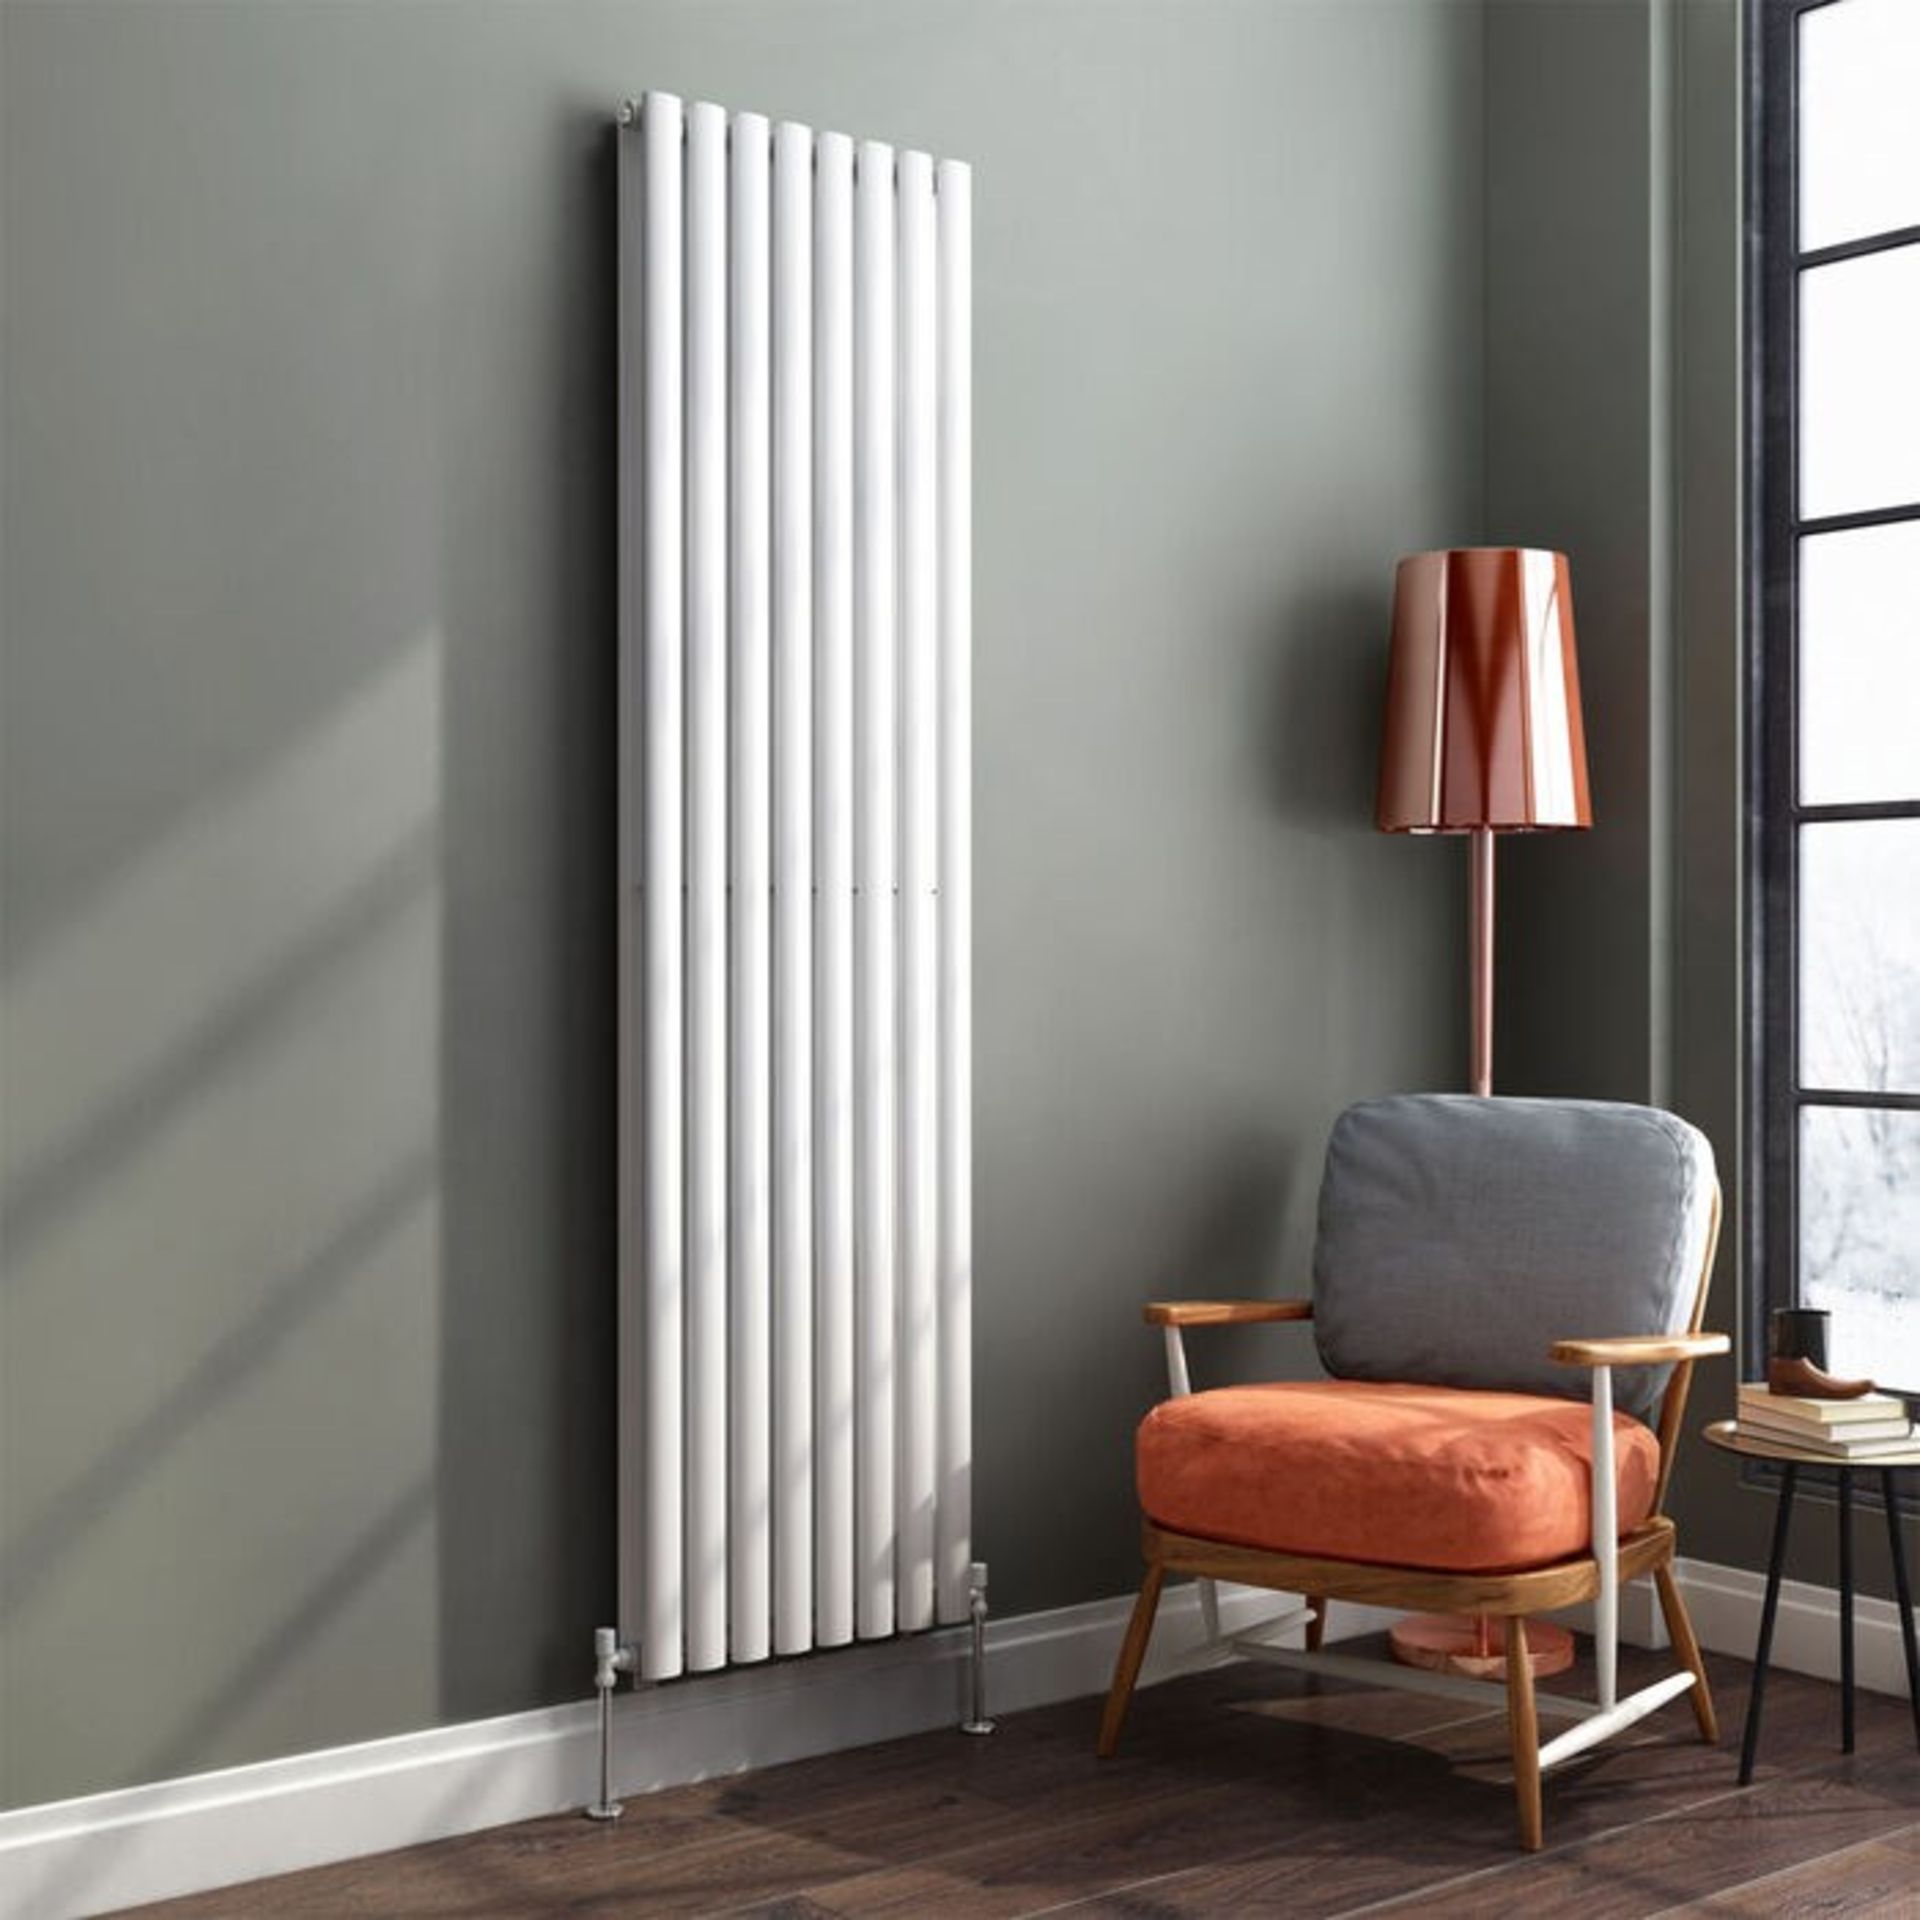 Brand New 1800x480mm Gloss White Double Oval Tube Vertical Radiator.RRP £499.99.Made from high quali - Image 2 of 3